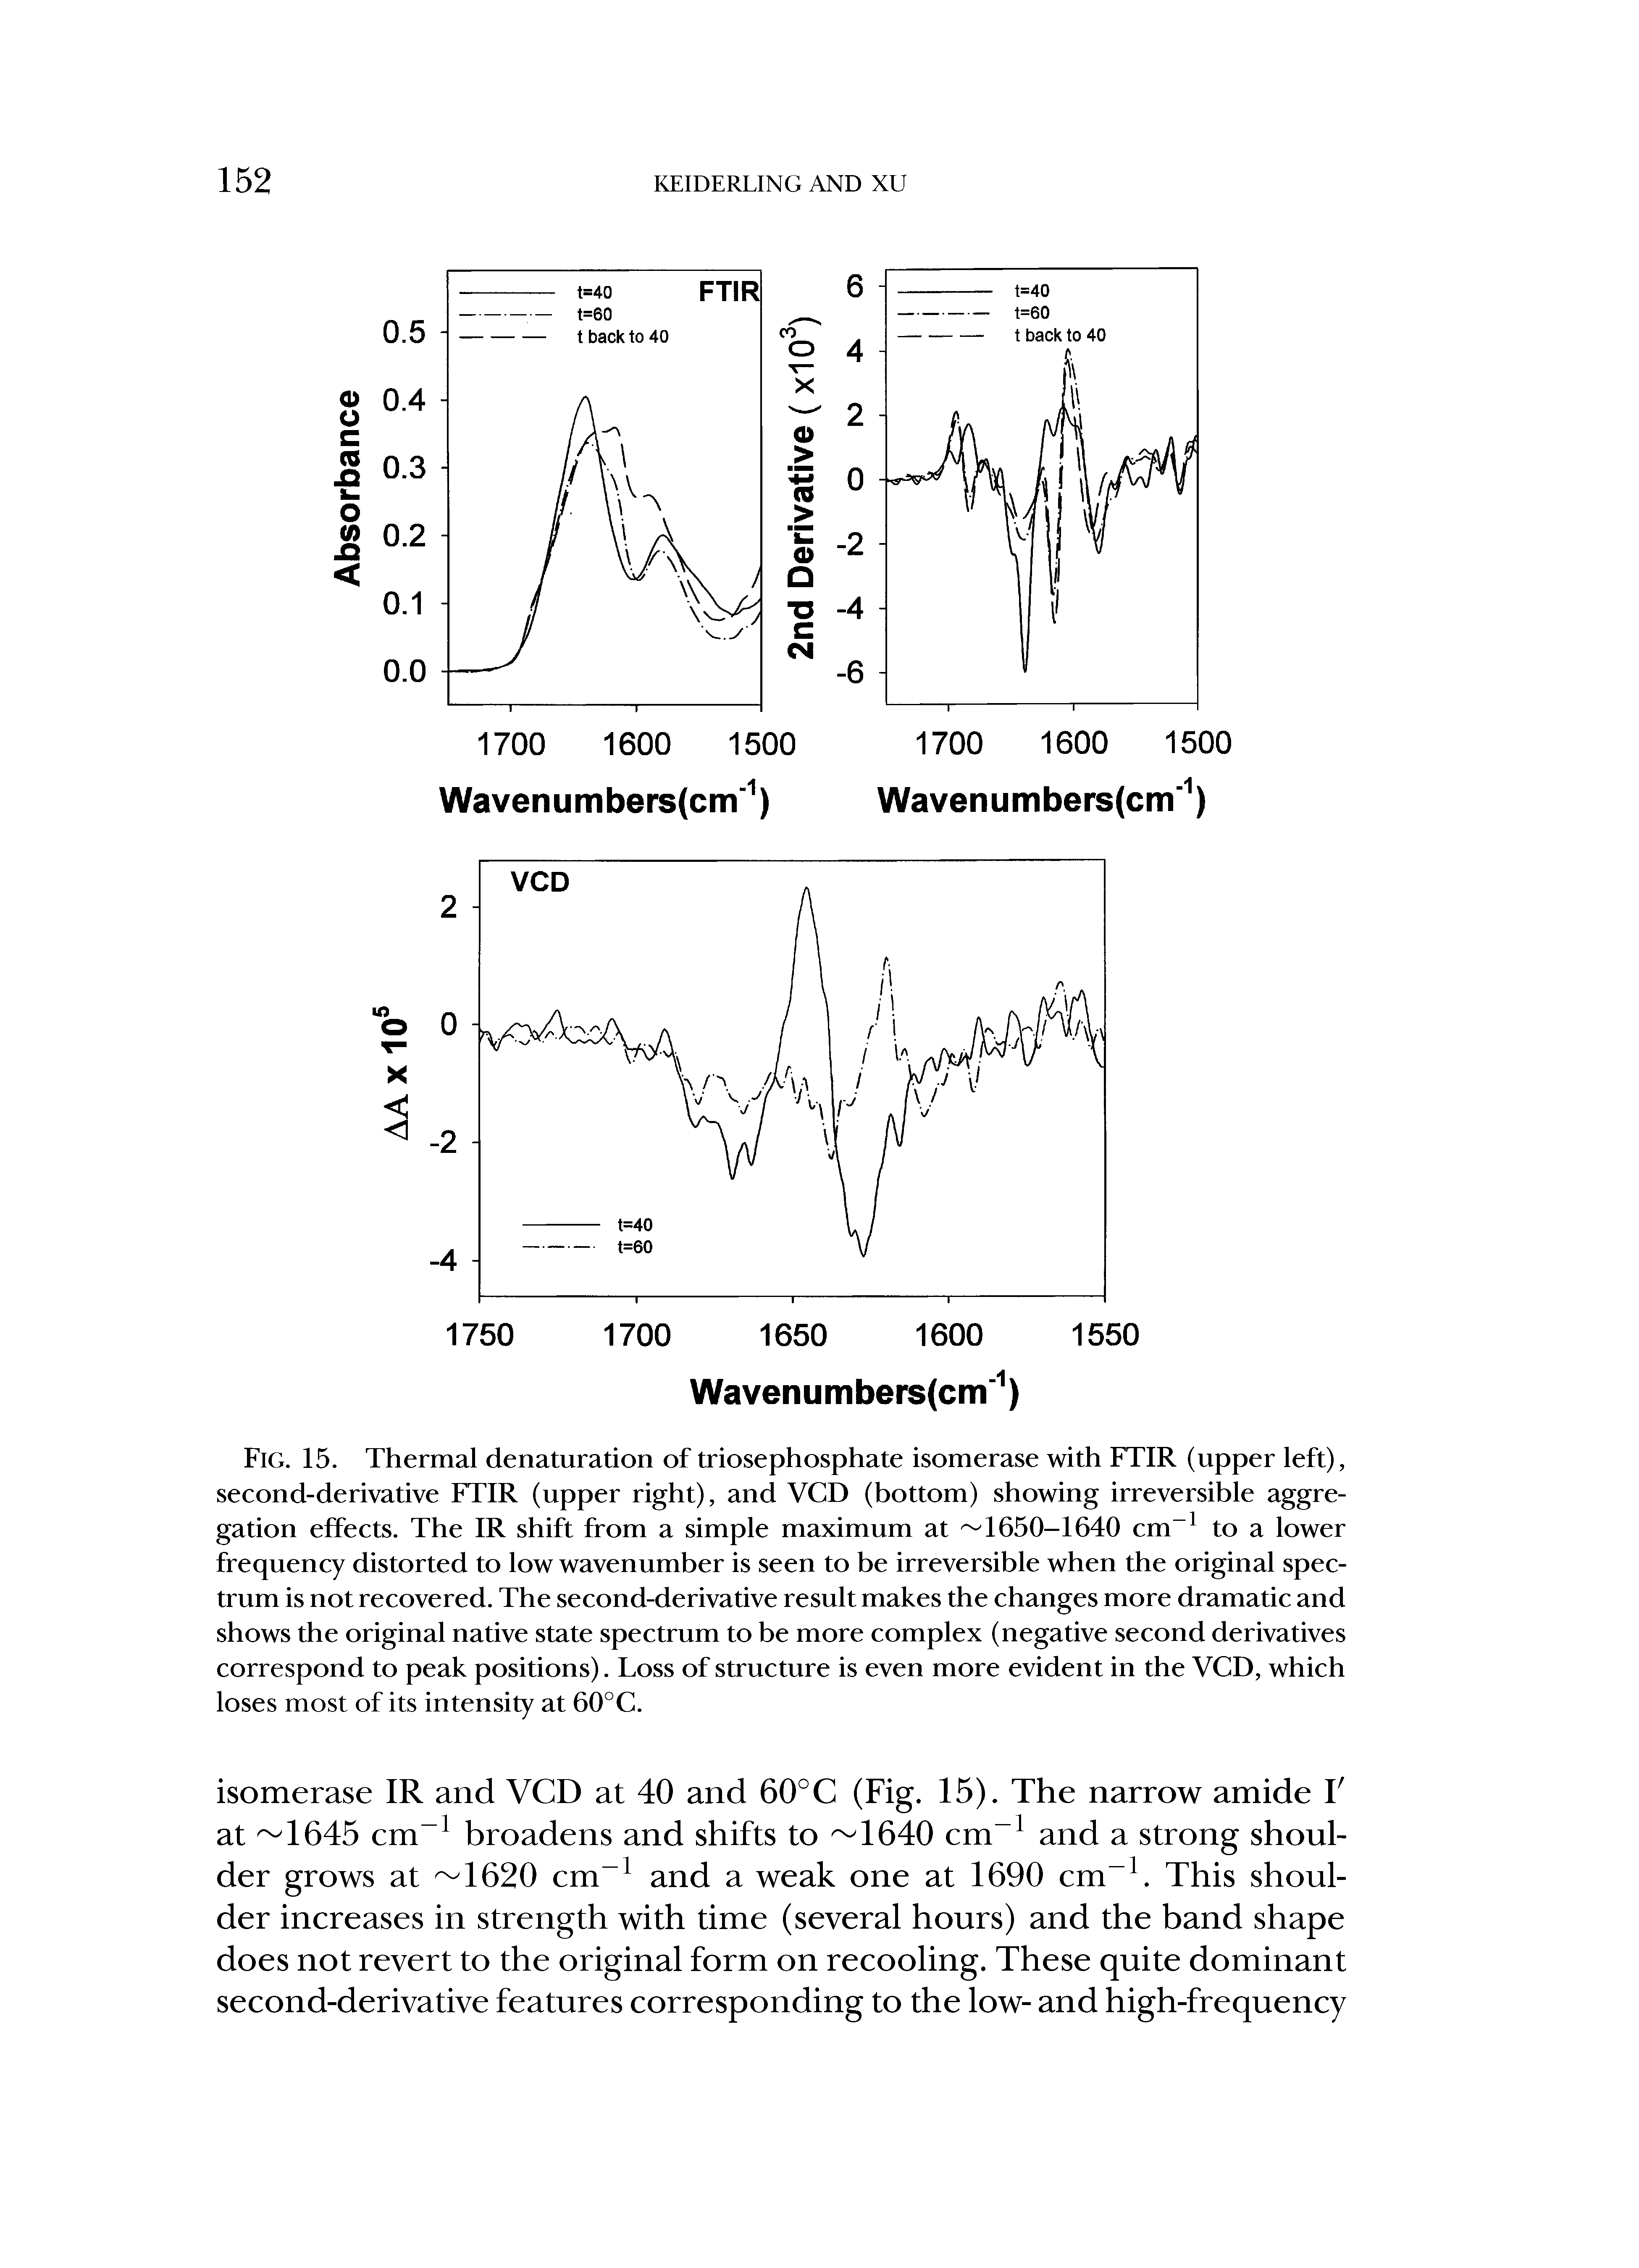 Fig. 15. Thermal denaturation of triosephosphate isomerase with FTIR (upper left), second-derivative FTIR (upper right), and VCD (bottom) showing irreversible aggregation effects. The IR shift from a simple maximum at 1650-1640 cm-1 to a lower frequency distorted to low wavenumber is seen to be irreversible when the original spectrum is not recovered. The second-derivative result makes the changes more dramatic and shows the original native state spectrum to be more complex (negative second derivatives correspond to peak positions). Loss of structure is even more evident in the VCD, which loses most of its intensity at 60°C.